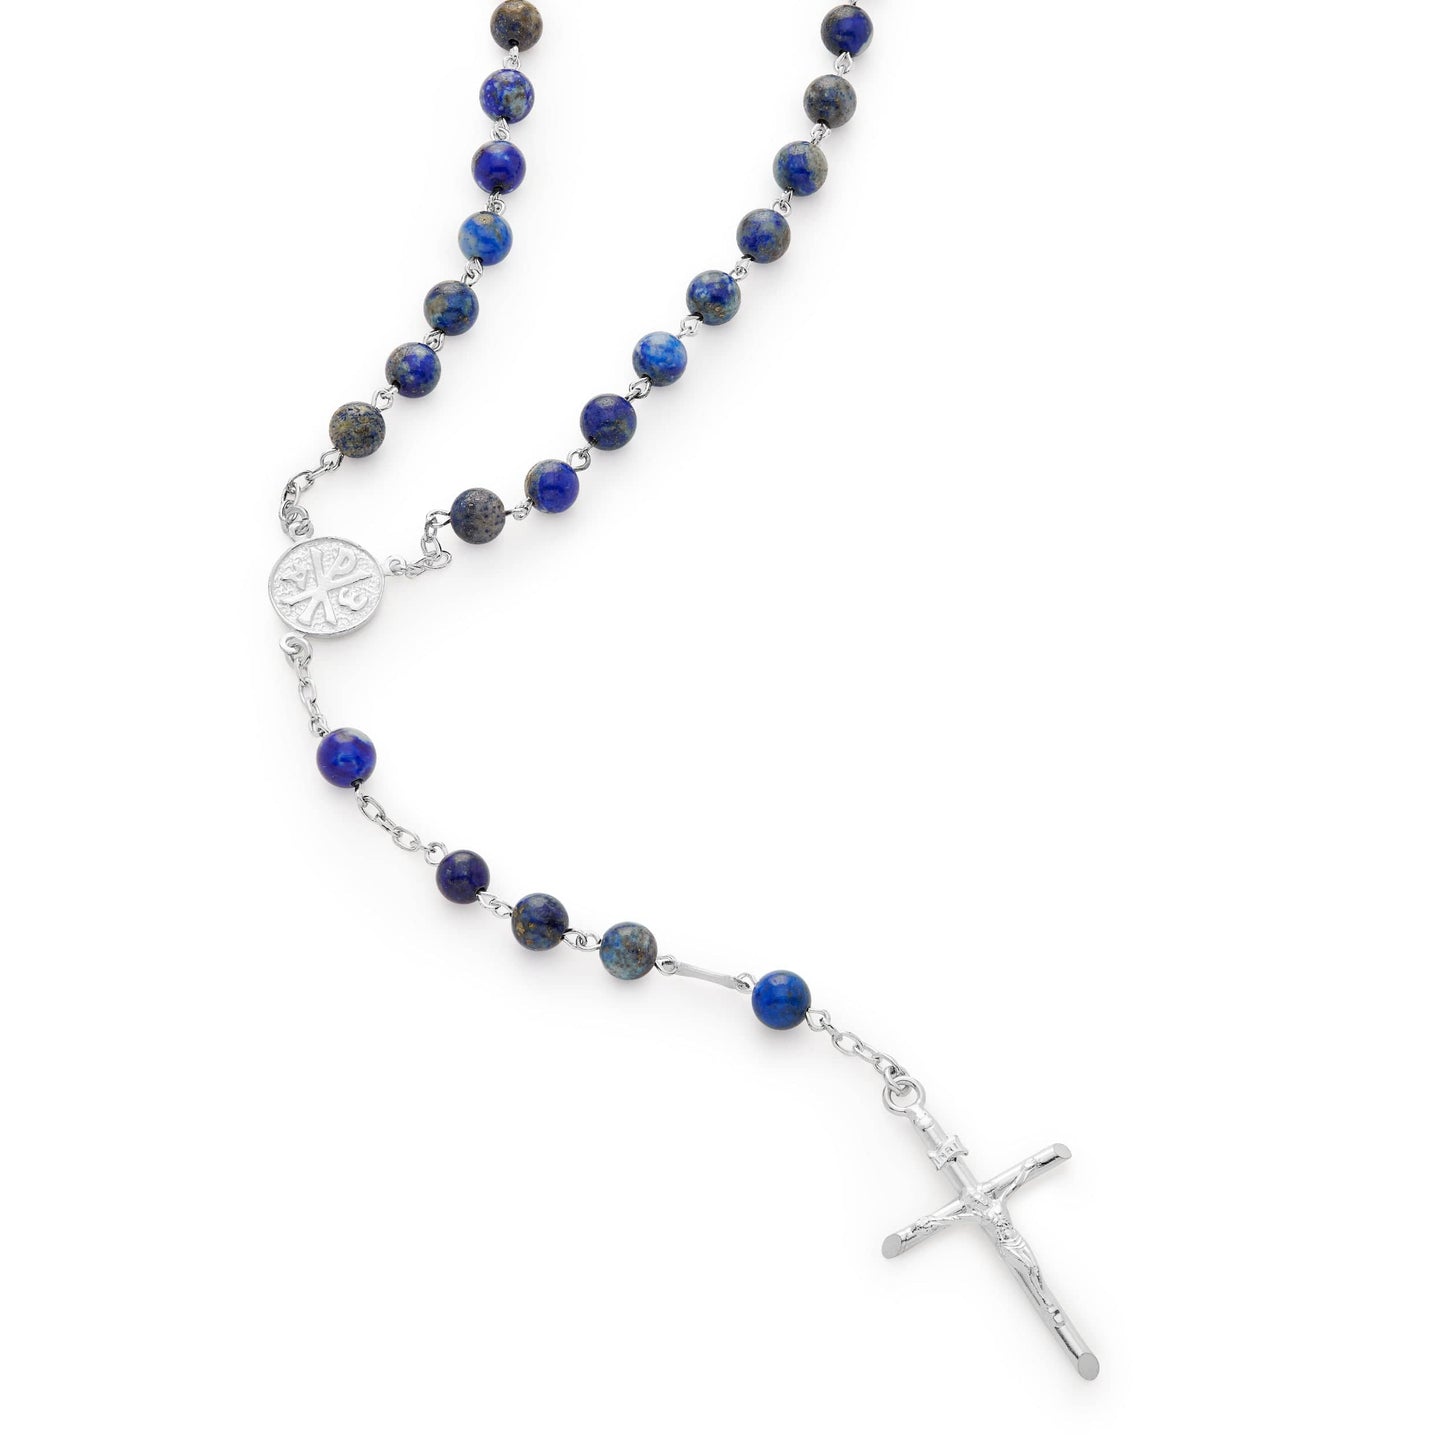 MONDO CATTOLICO Prayer Beads 51 Cm (20.07 in) / 6 mm (0.23 in) Sterling Silver Lapis Lazuli Rosary